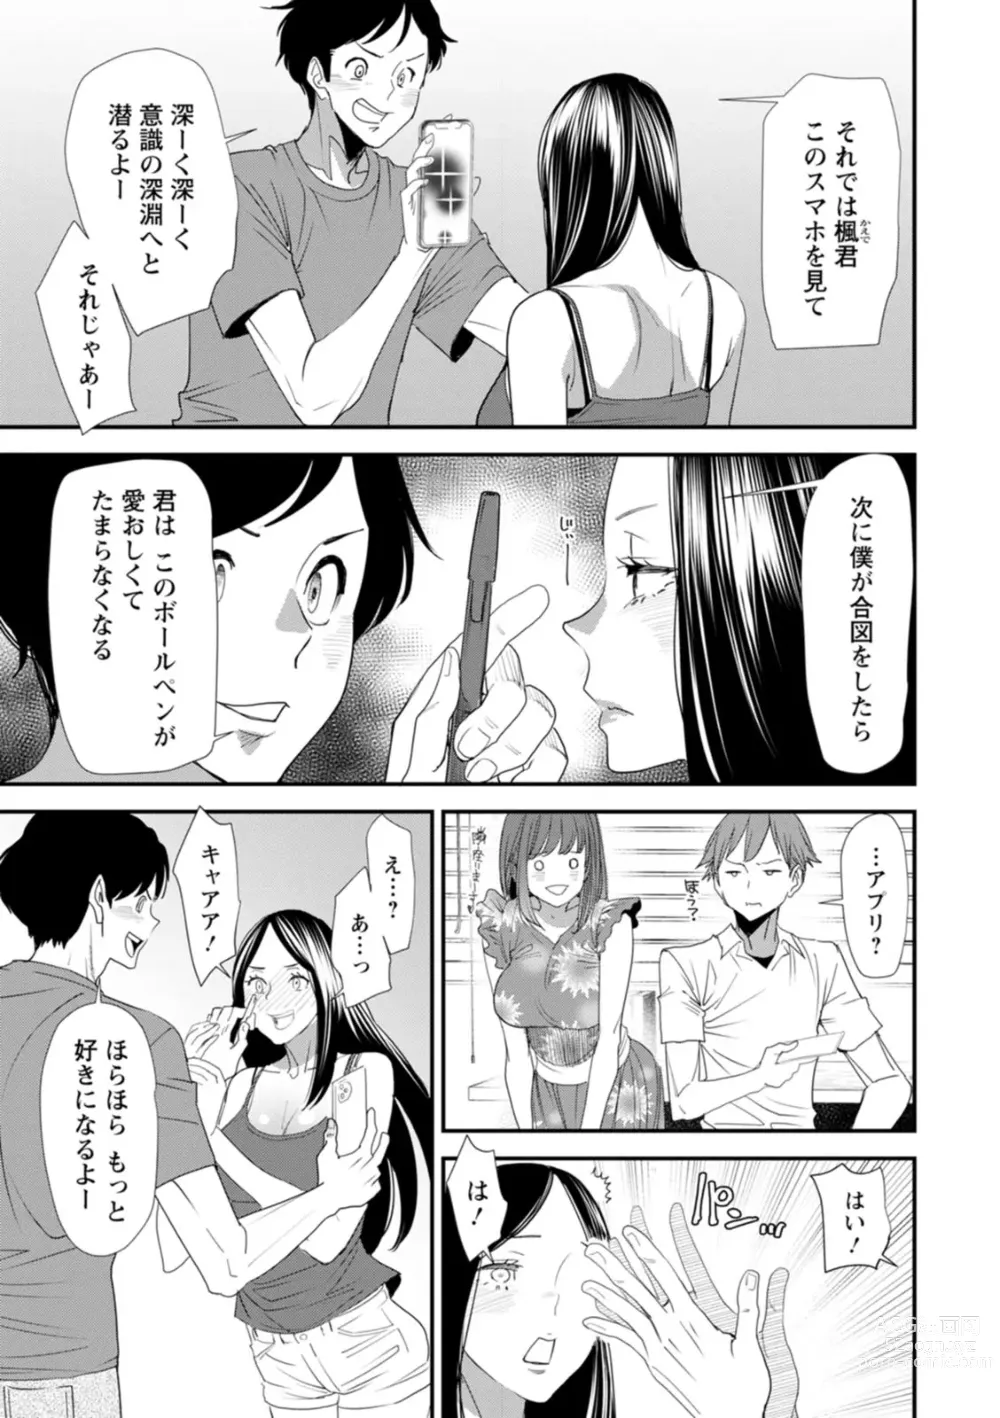 Page 25 of manga Inma Joshi Daisei no Yuuutsu - The Melancholy of the Succubus who is a college student